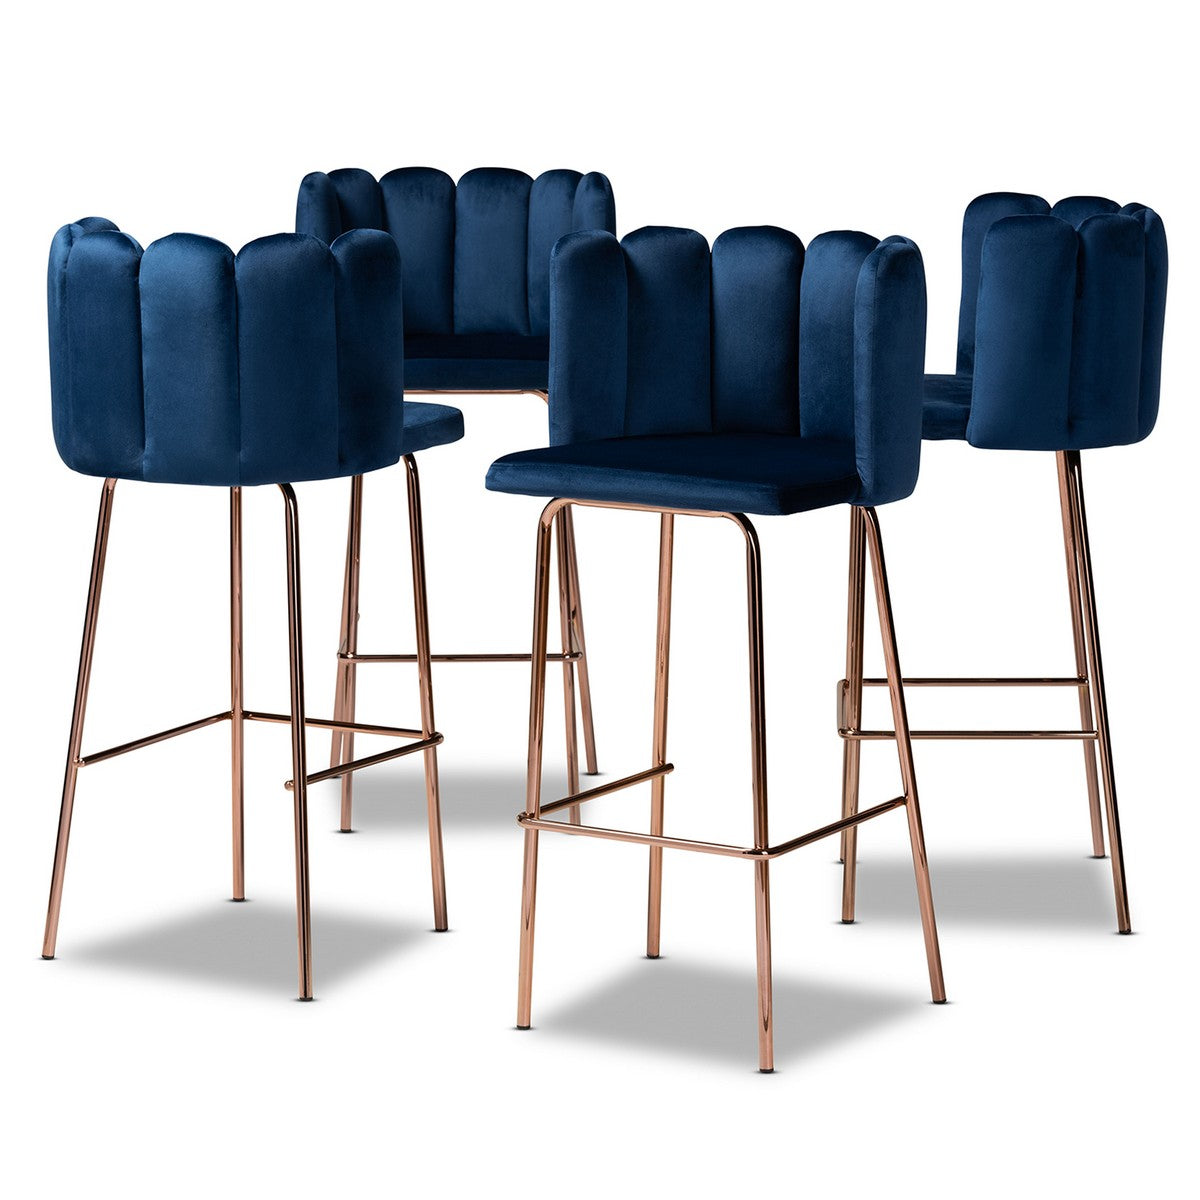 Baxton Studio Kaelin Luxe and Glam Navy Blue Velvet Fabric Upholstered and Rose Gold Finished 4-Piece Bar Stool Set Baxton Studio-Bar Stools-Minimal And Modern - 1